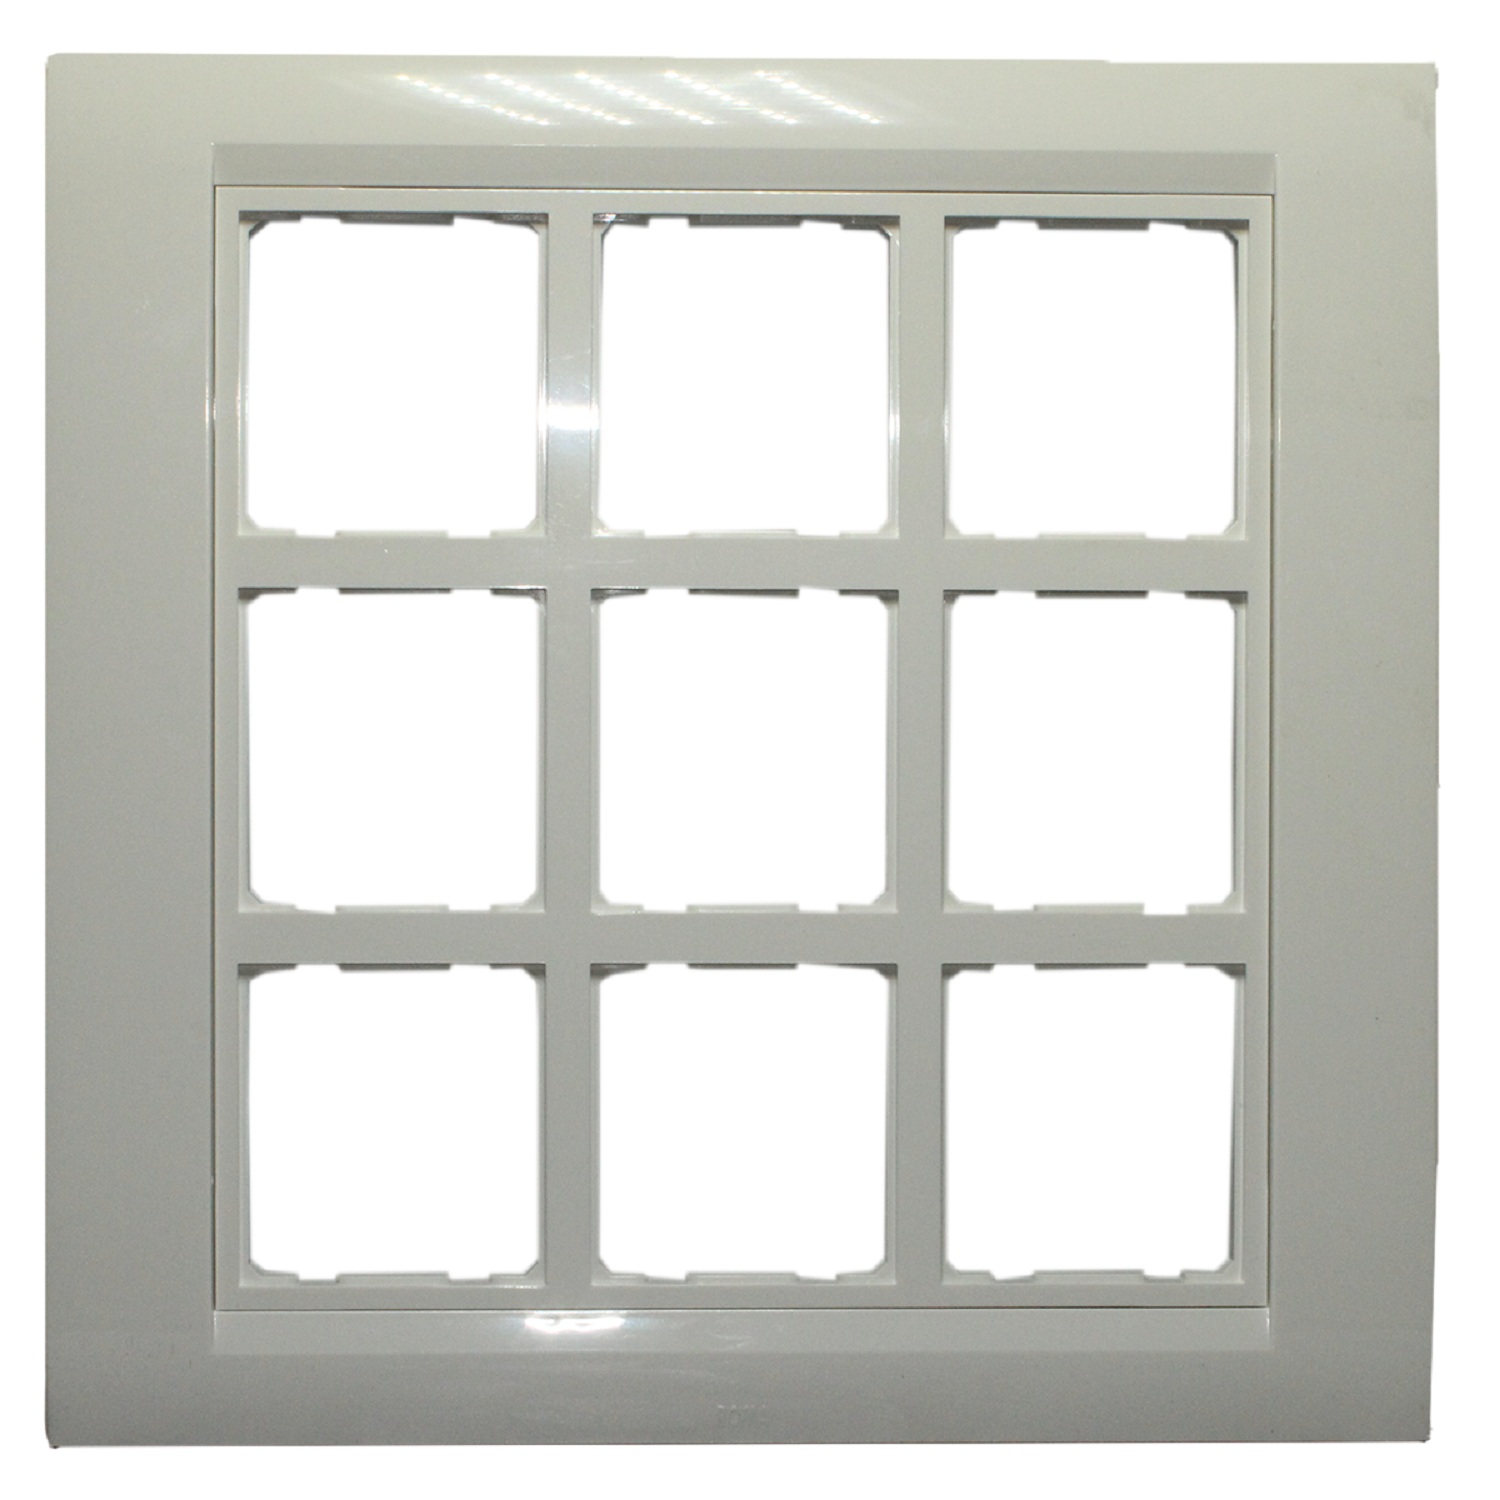 Legrand Mylinc 18 Modular Cover Plate With Base Frame -White